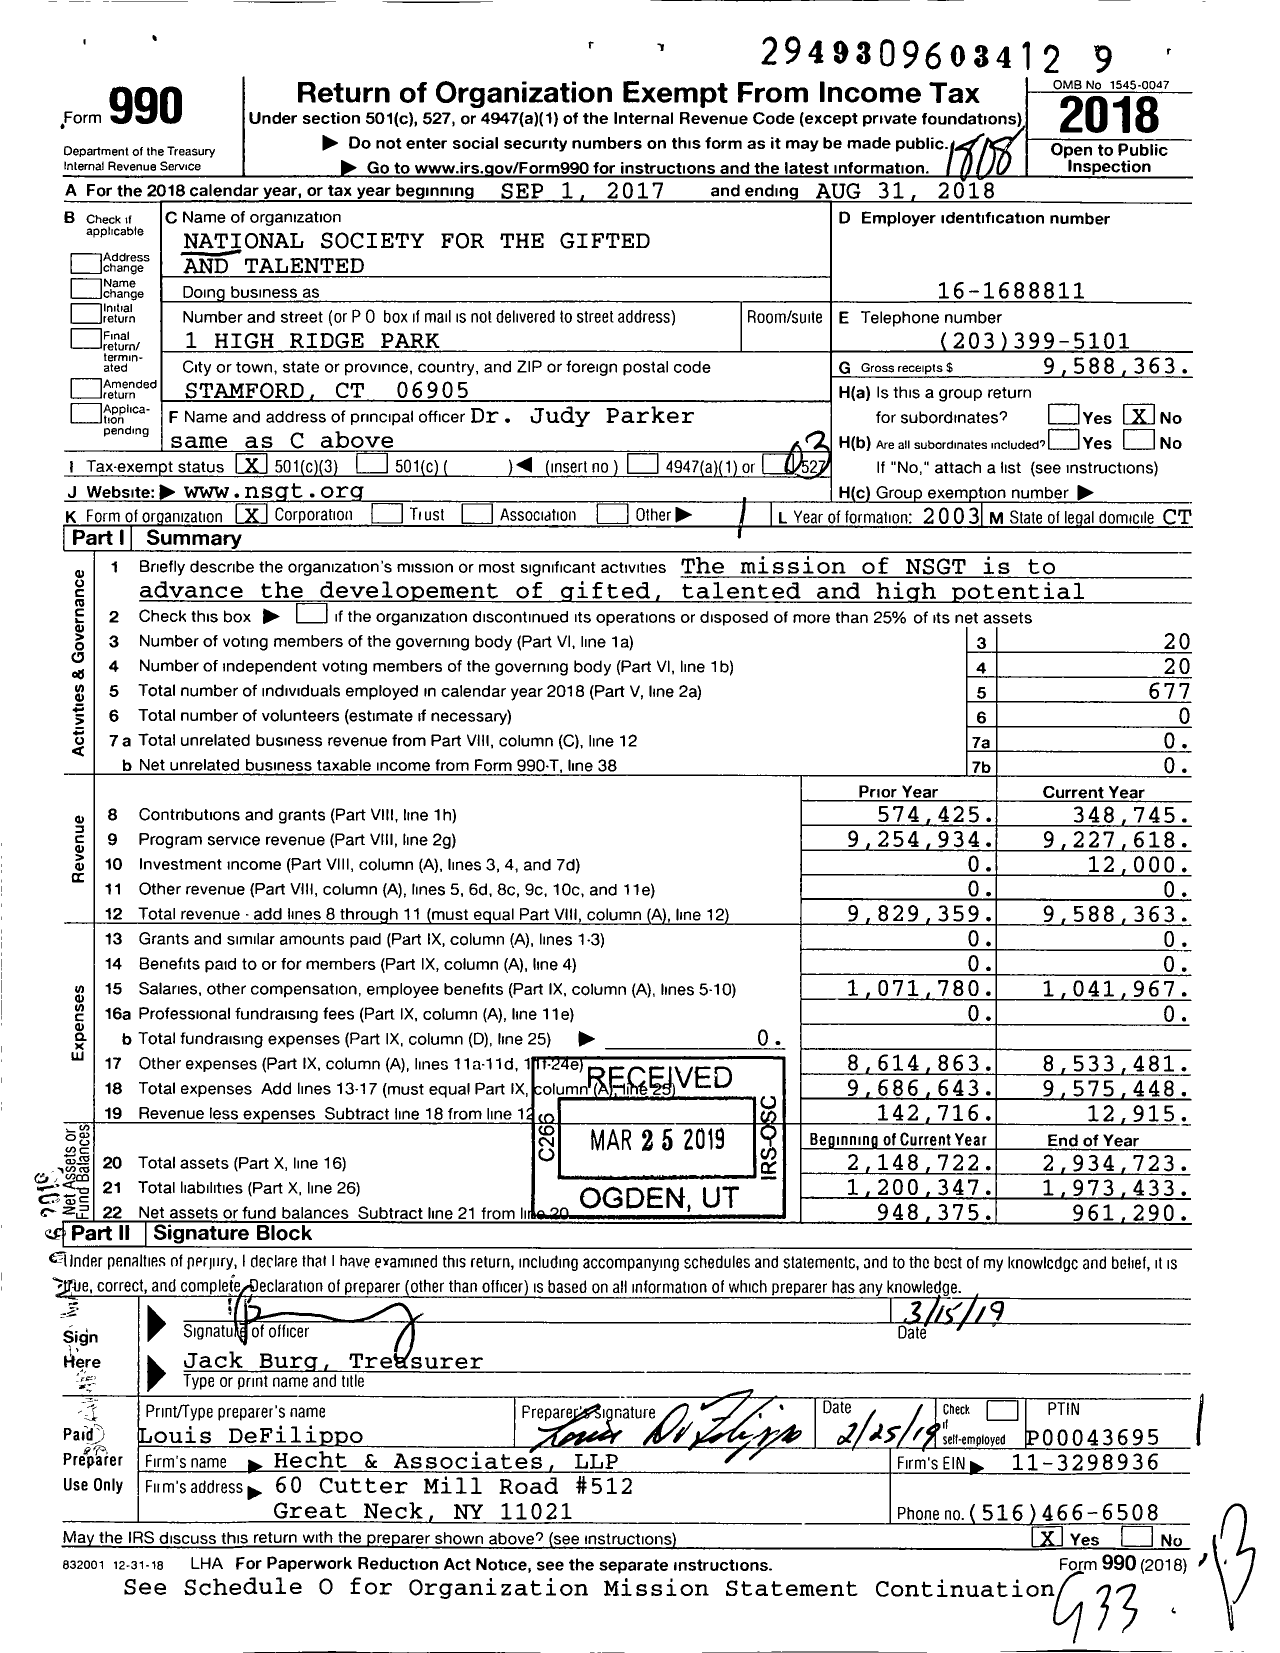 Image of first page of 2017 Form 990 for National Society for the Gifted and Talented (NSGT)